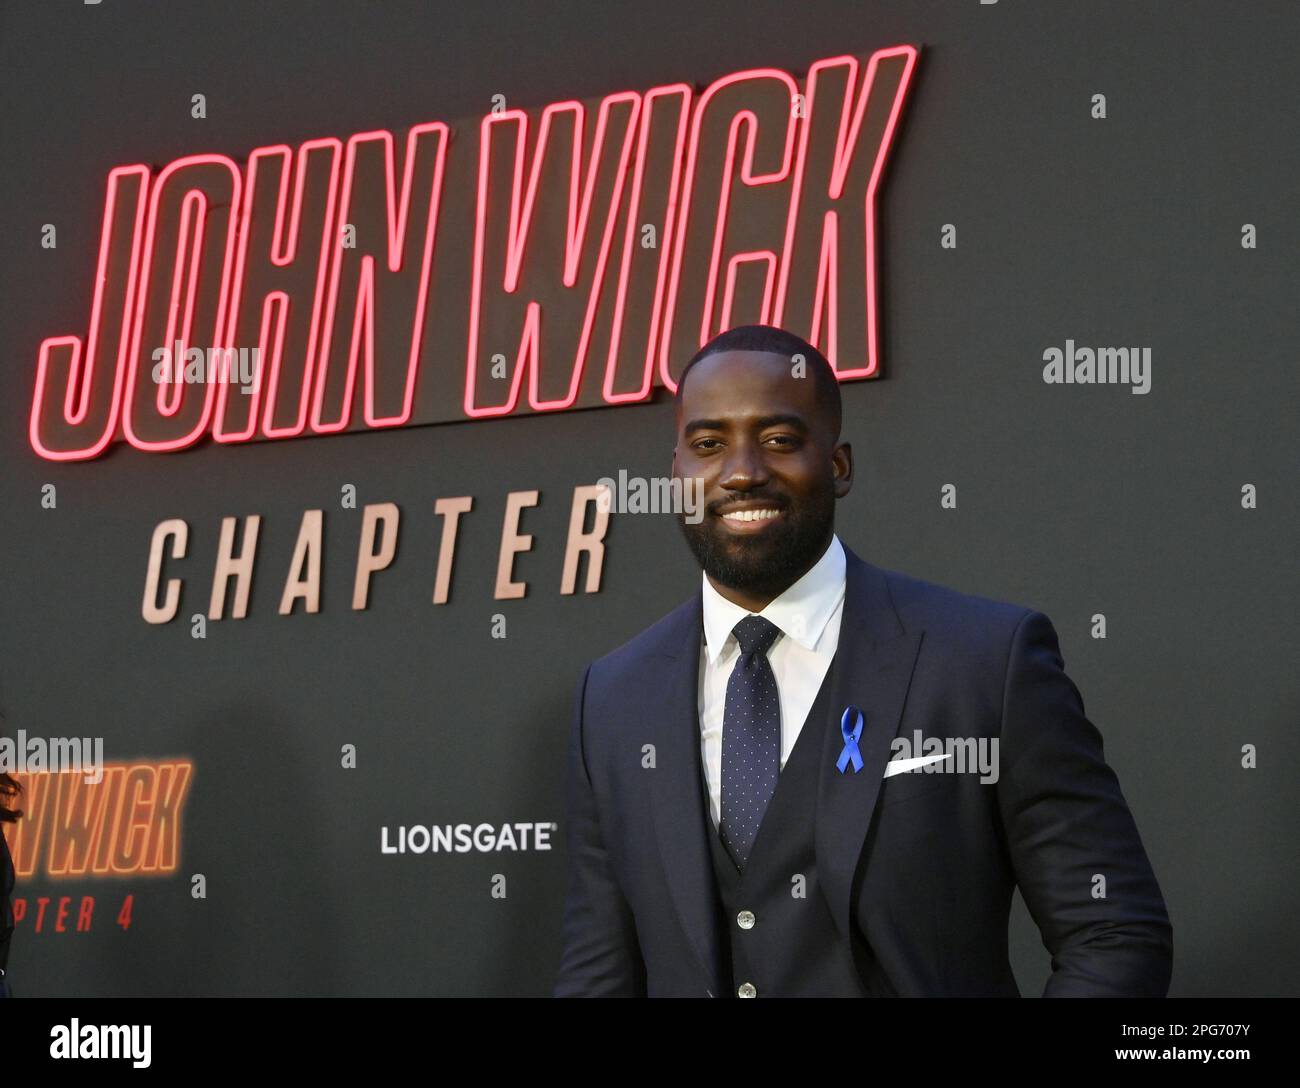 Los Angeles, United States. 20th Mar, 2023. Cast member Shamier Anderson attends the premiere of the motion picture crime thriller 'John Wick: Chapter 4' at the TC: Theatre in the Hollywood section of Los Angeles on Monday, March 20, 2023. Storyline: John Wick uncovers a path to defeating The High Table. But before he can earn his freedom, Wick must face off against a new enemy with powerful alliances across the globe and forces that turn old friends into foes. Photo by Jim Ruymen/UPI Credit: UPI/Alamy Live News Stock Photo